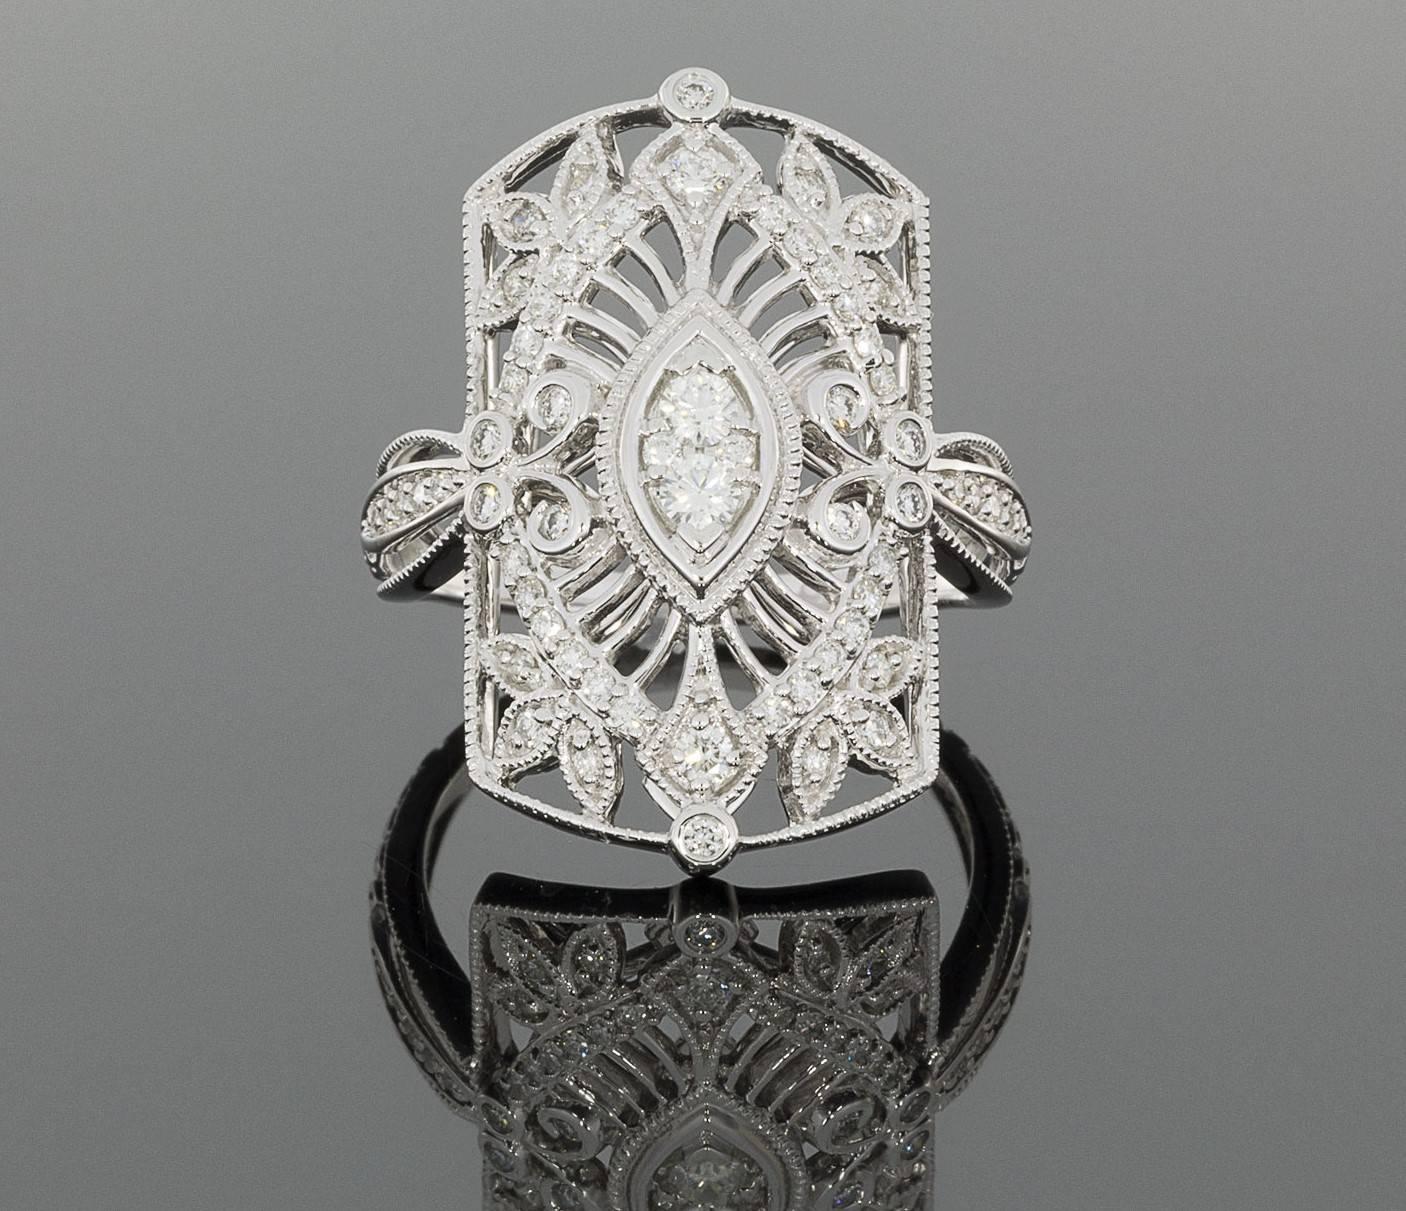 This stunning ring is a beautiful vintage style ring with lovely open filigree work, scrolls, leaf shapes, & milgrain accents. The ring is comprised of 18 karat white gold & features .52 carat total weight in sparkly diamonds. The center of the ring